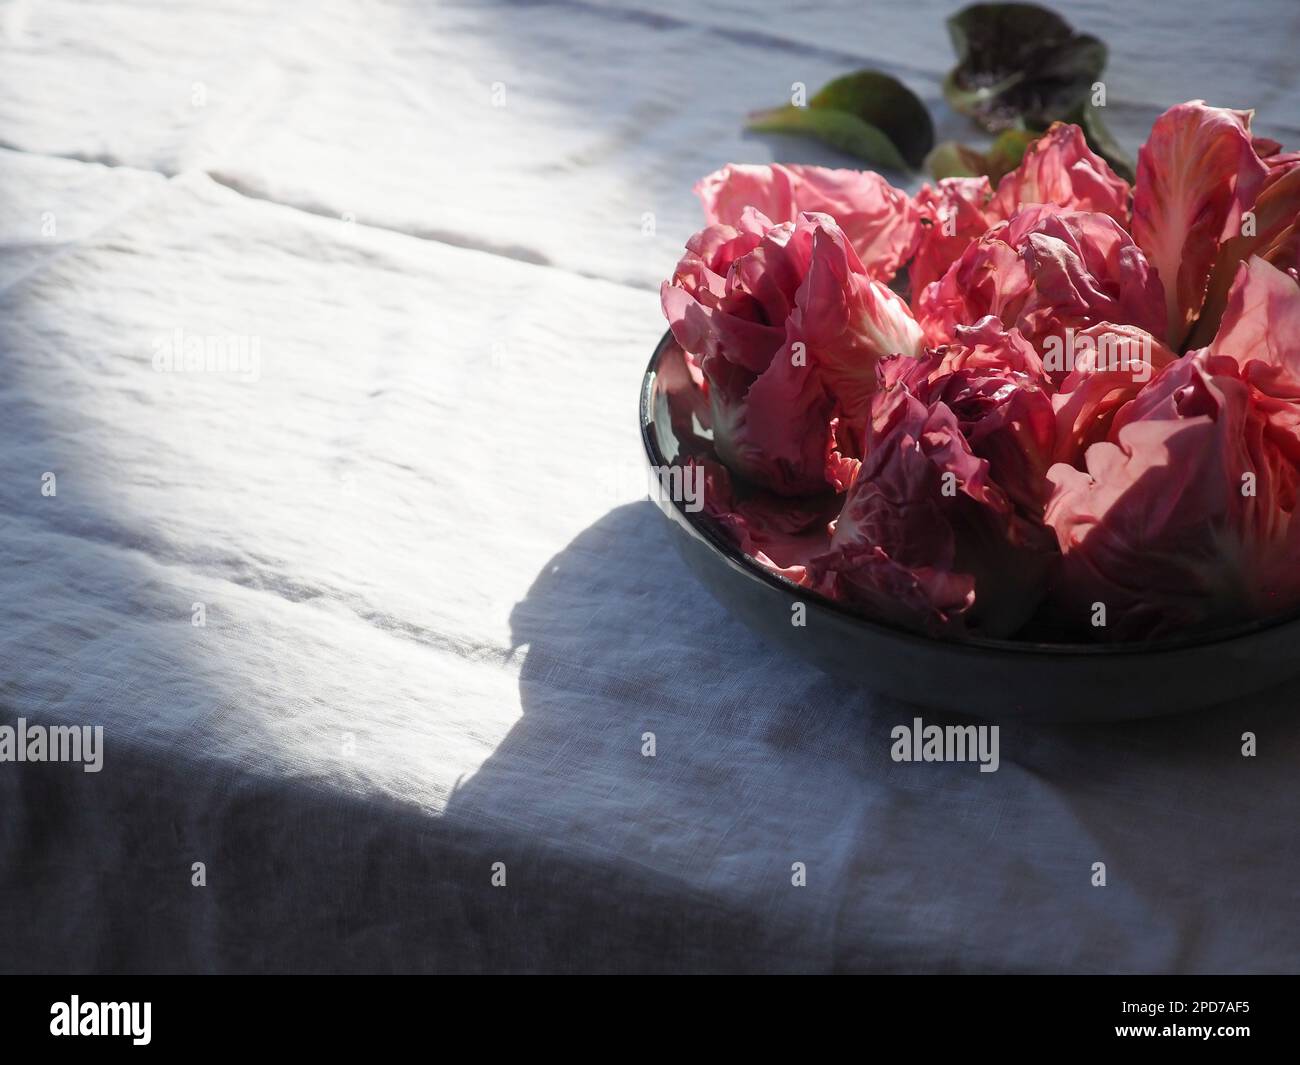 Pink Rosa del Veneto chicory / radicchio / lettuce heads in a bowl on a table with a shaft of sunlight creating high contrast. Space for copy to left Stock Photo